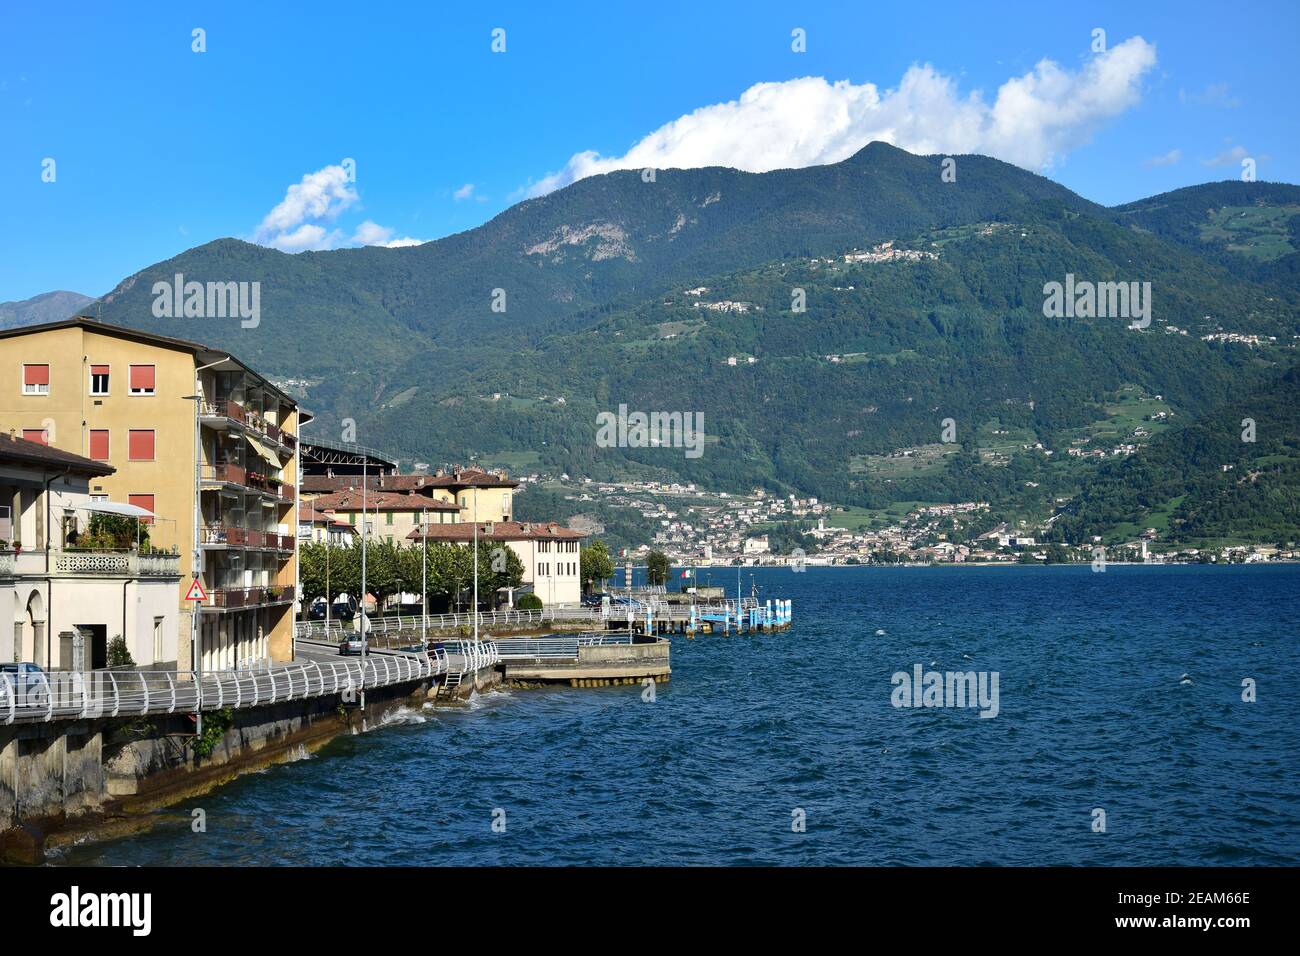 The small town Castro at Lake Iseo, Lombardy, Italy. Stock Photo